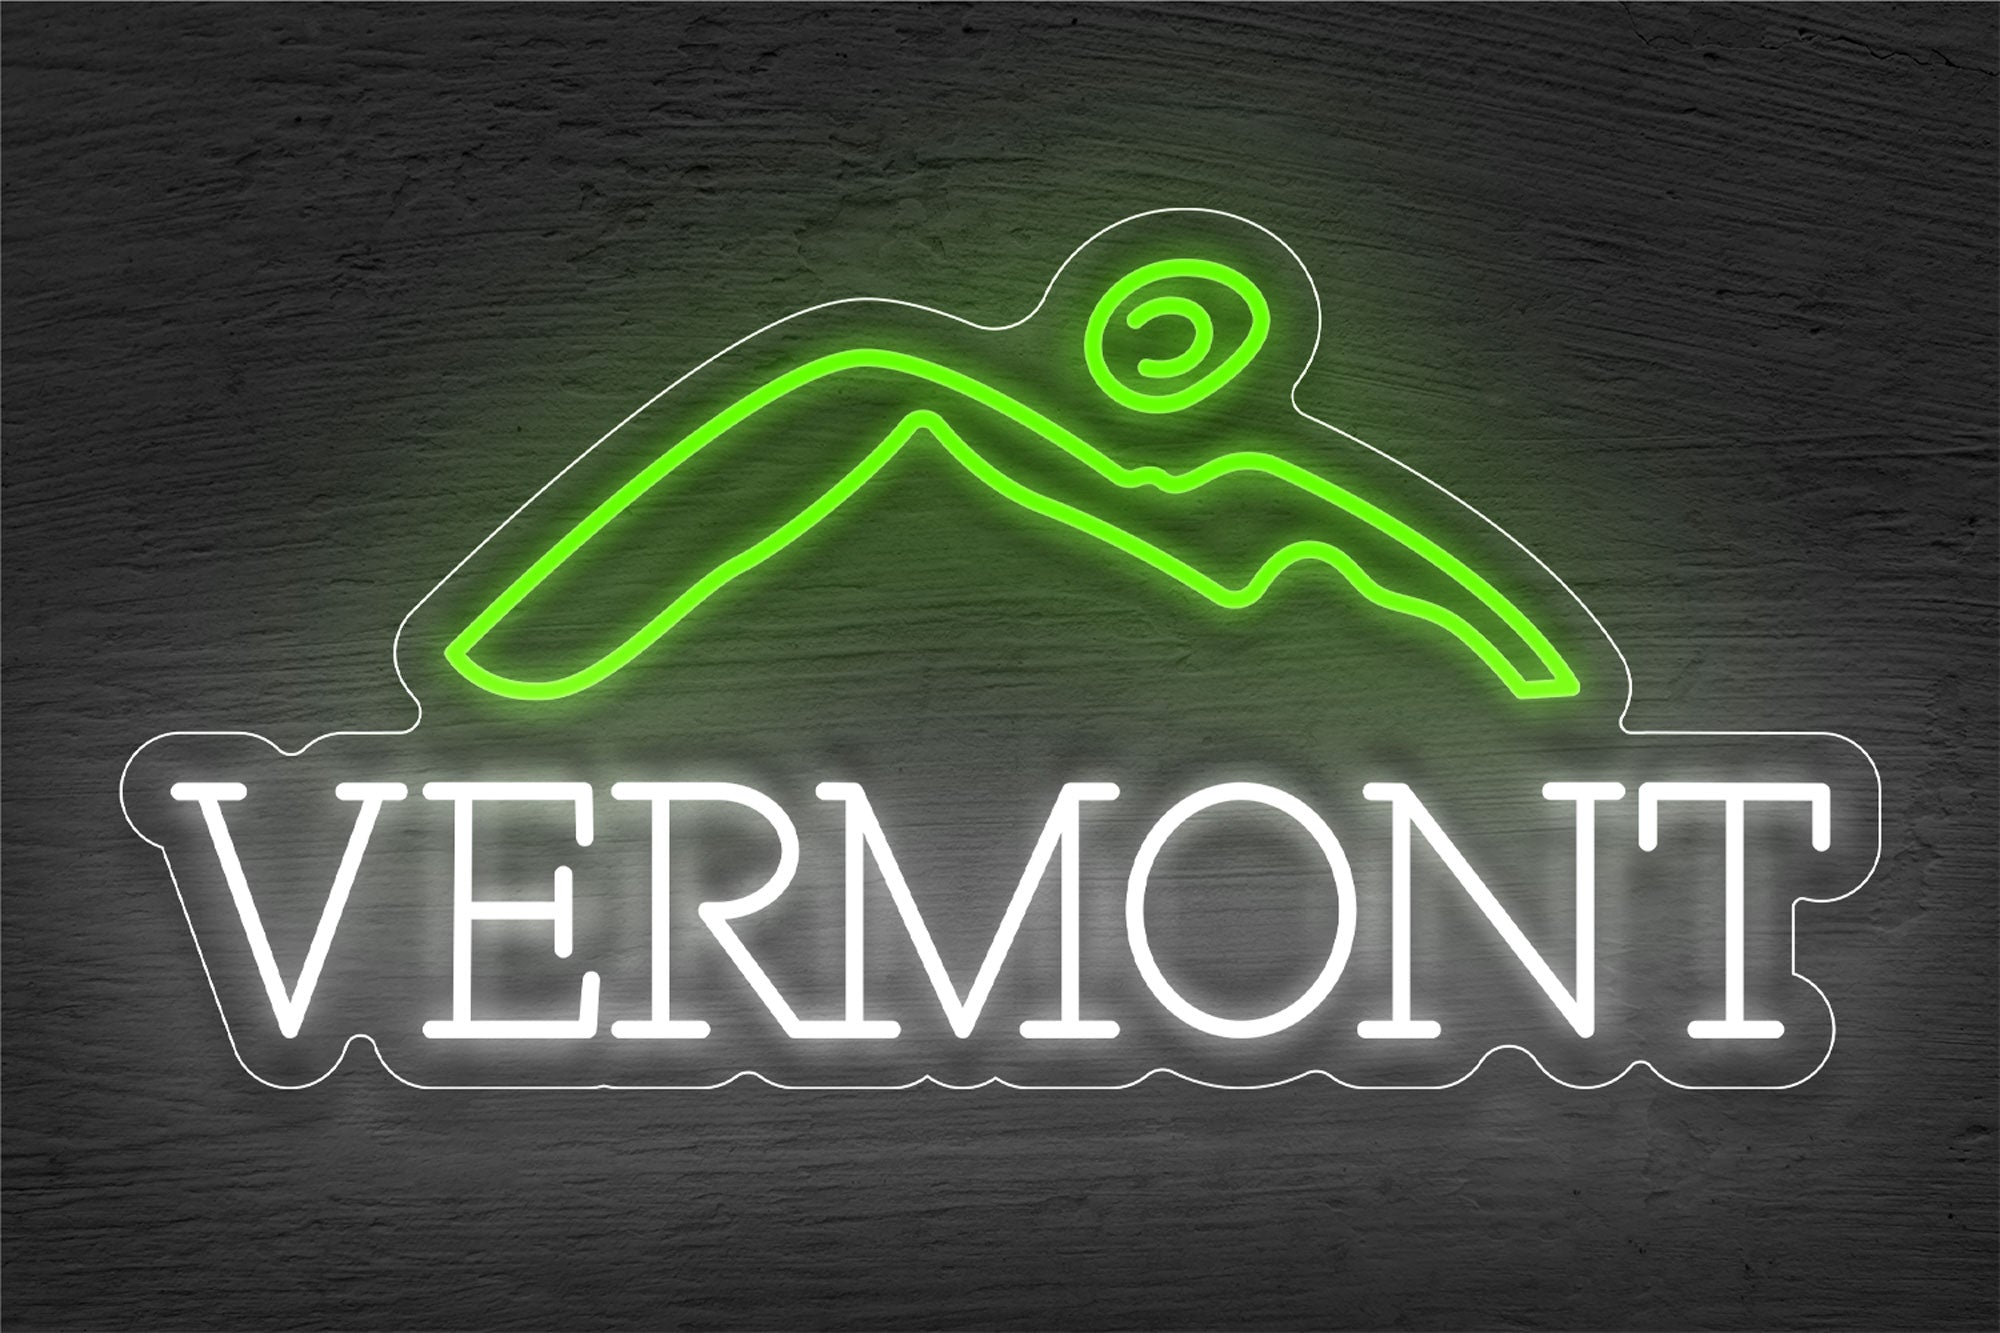 Vermont with Logo LED Neon Sign